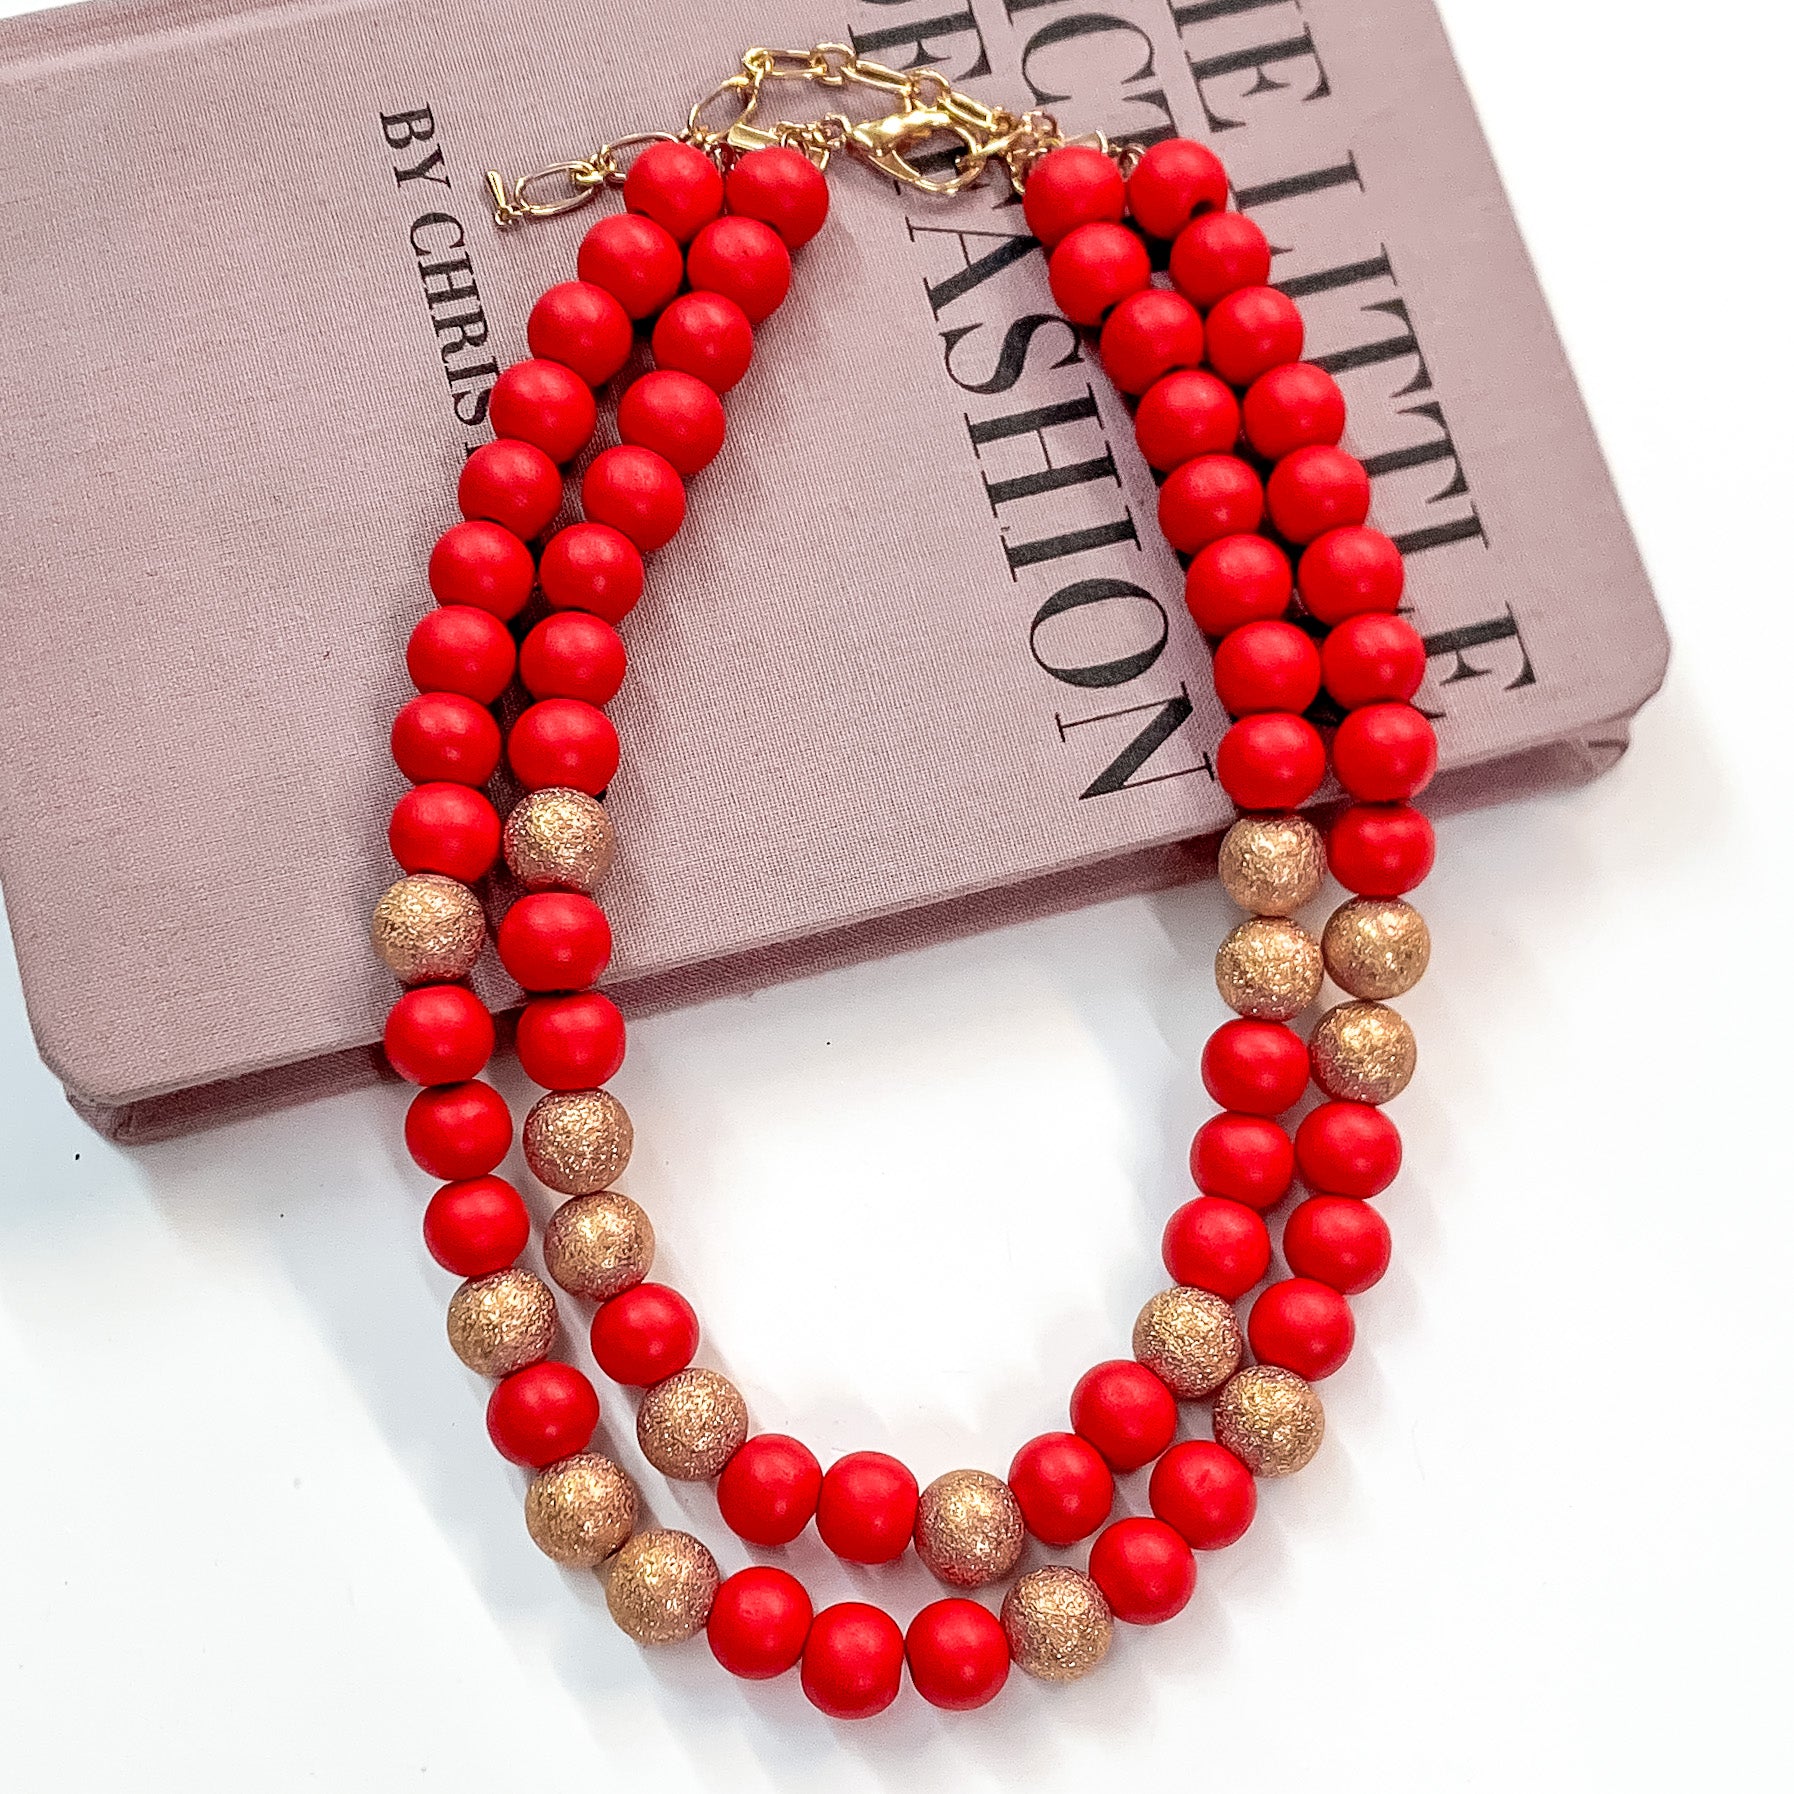 Pictured partially on a mauve colored book on a white background is a two strand red beaded necklace with gold beaded spacers and gold hardware. 